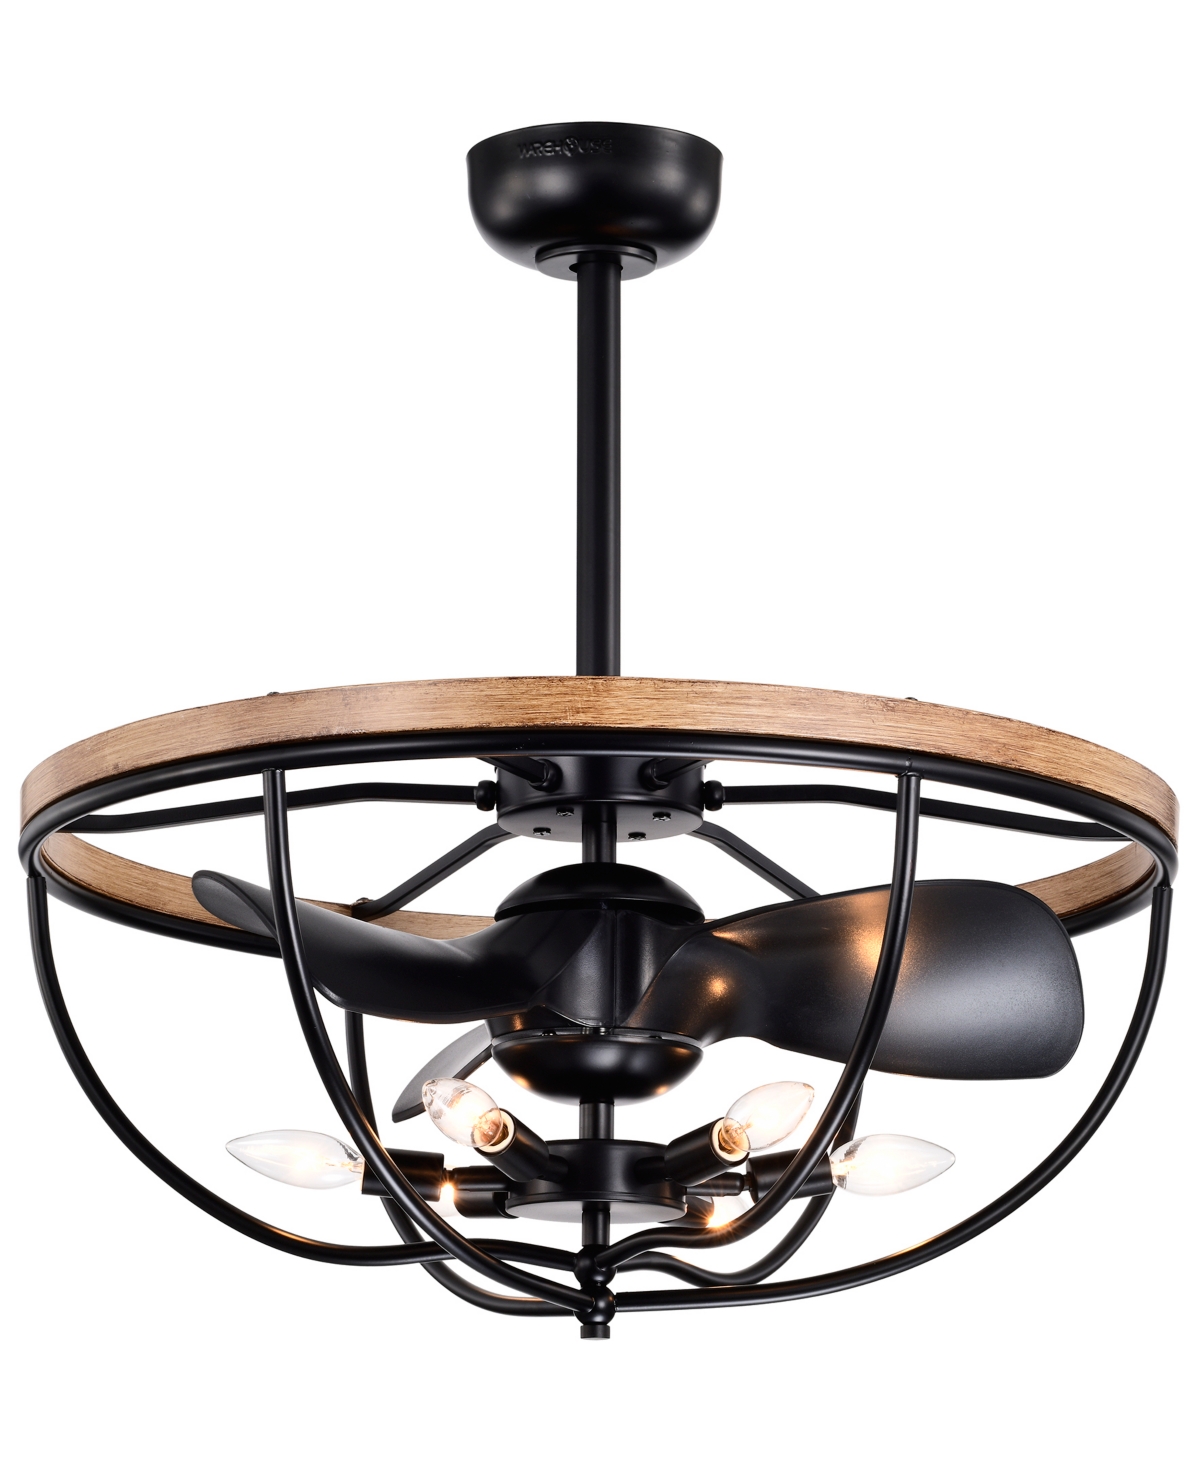 Home Accessories Adeline 26" 6-light Indoor Ceiling Fan With Light Kit And Remote In Matte Black